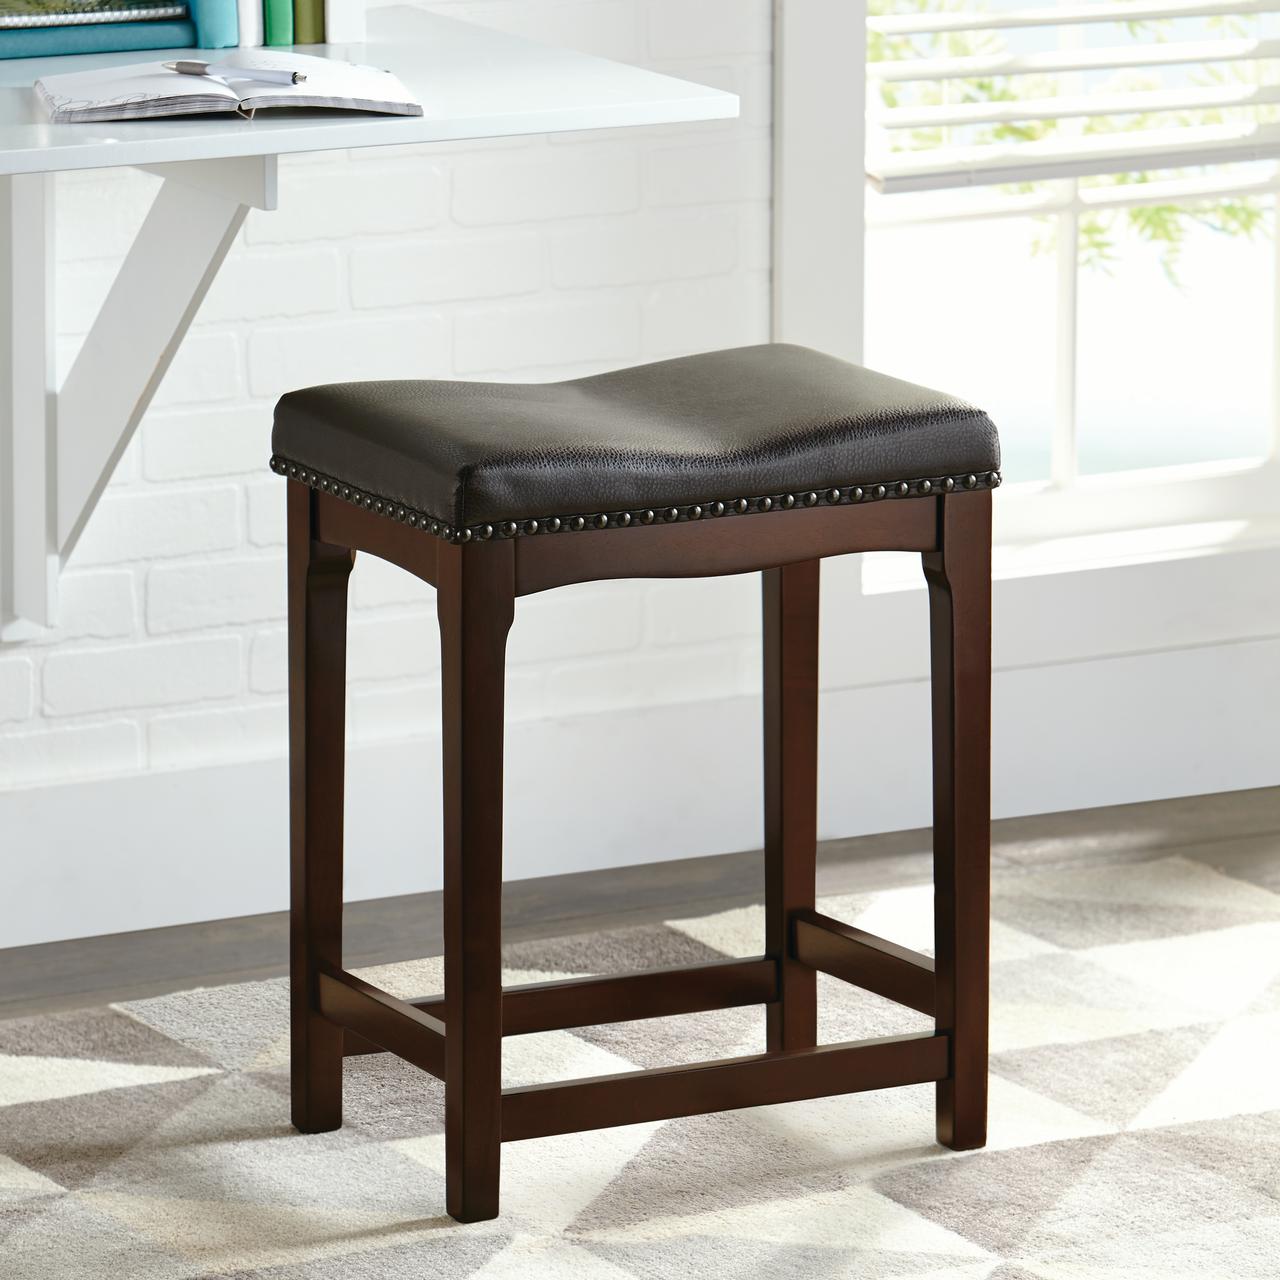 Better Homes & Gardens Brown Faux Leather Wayne 24" Saddle Bar Stool - image 2 of 2